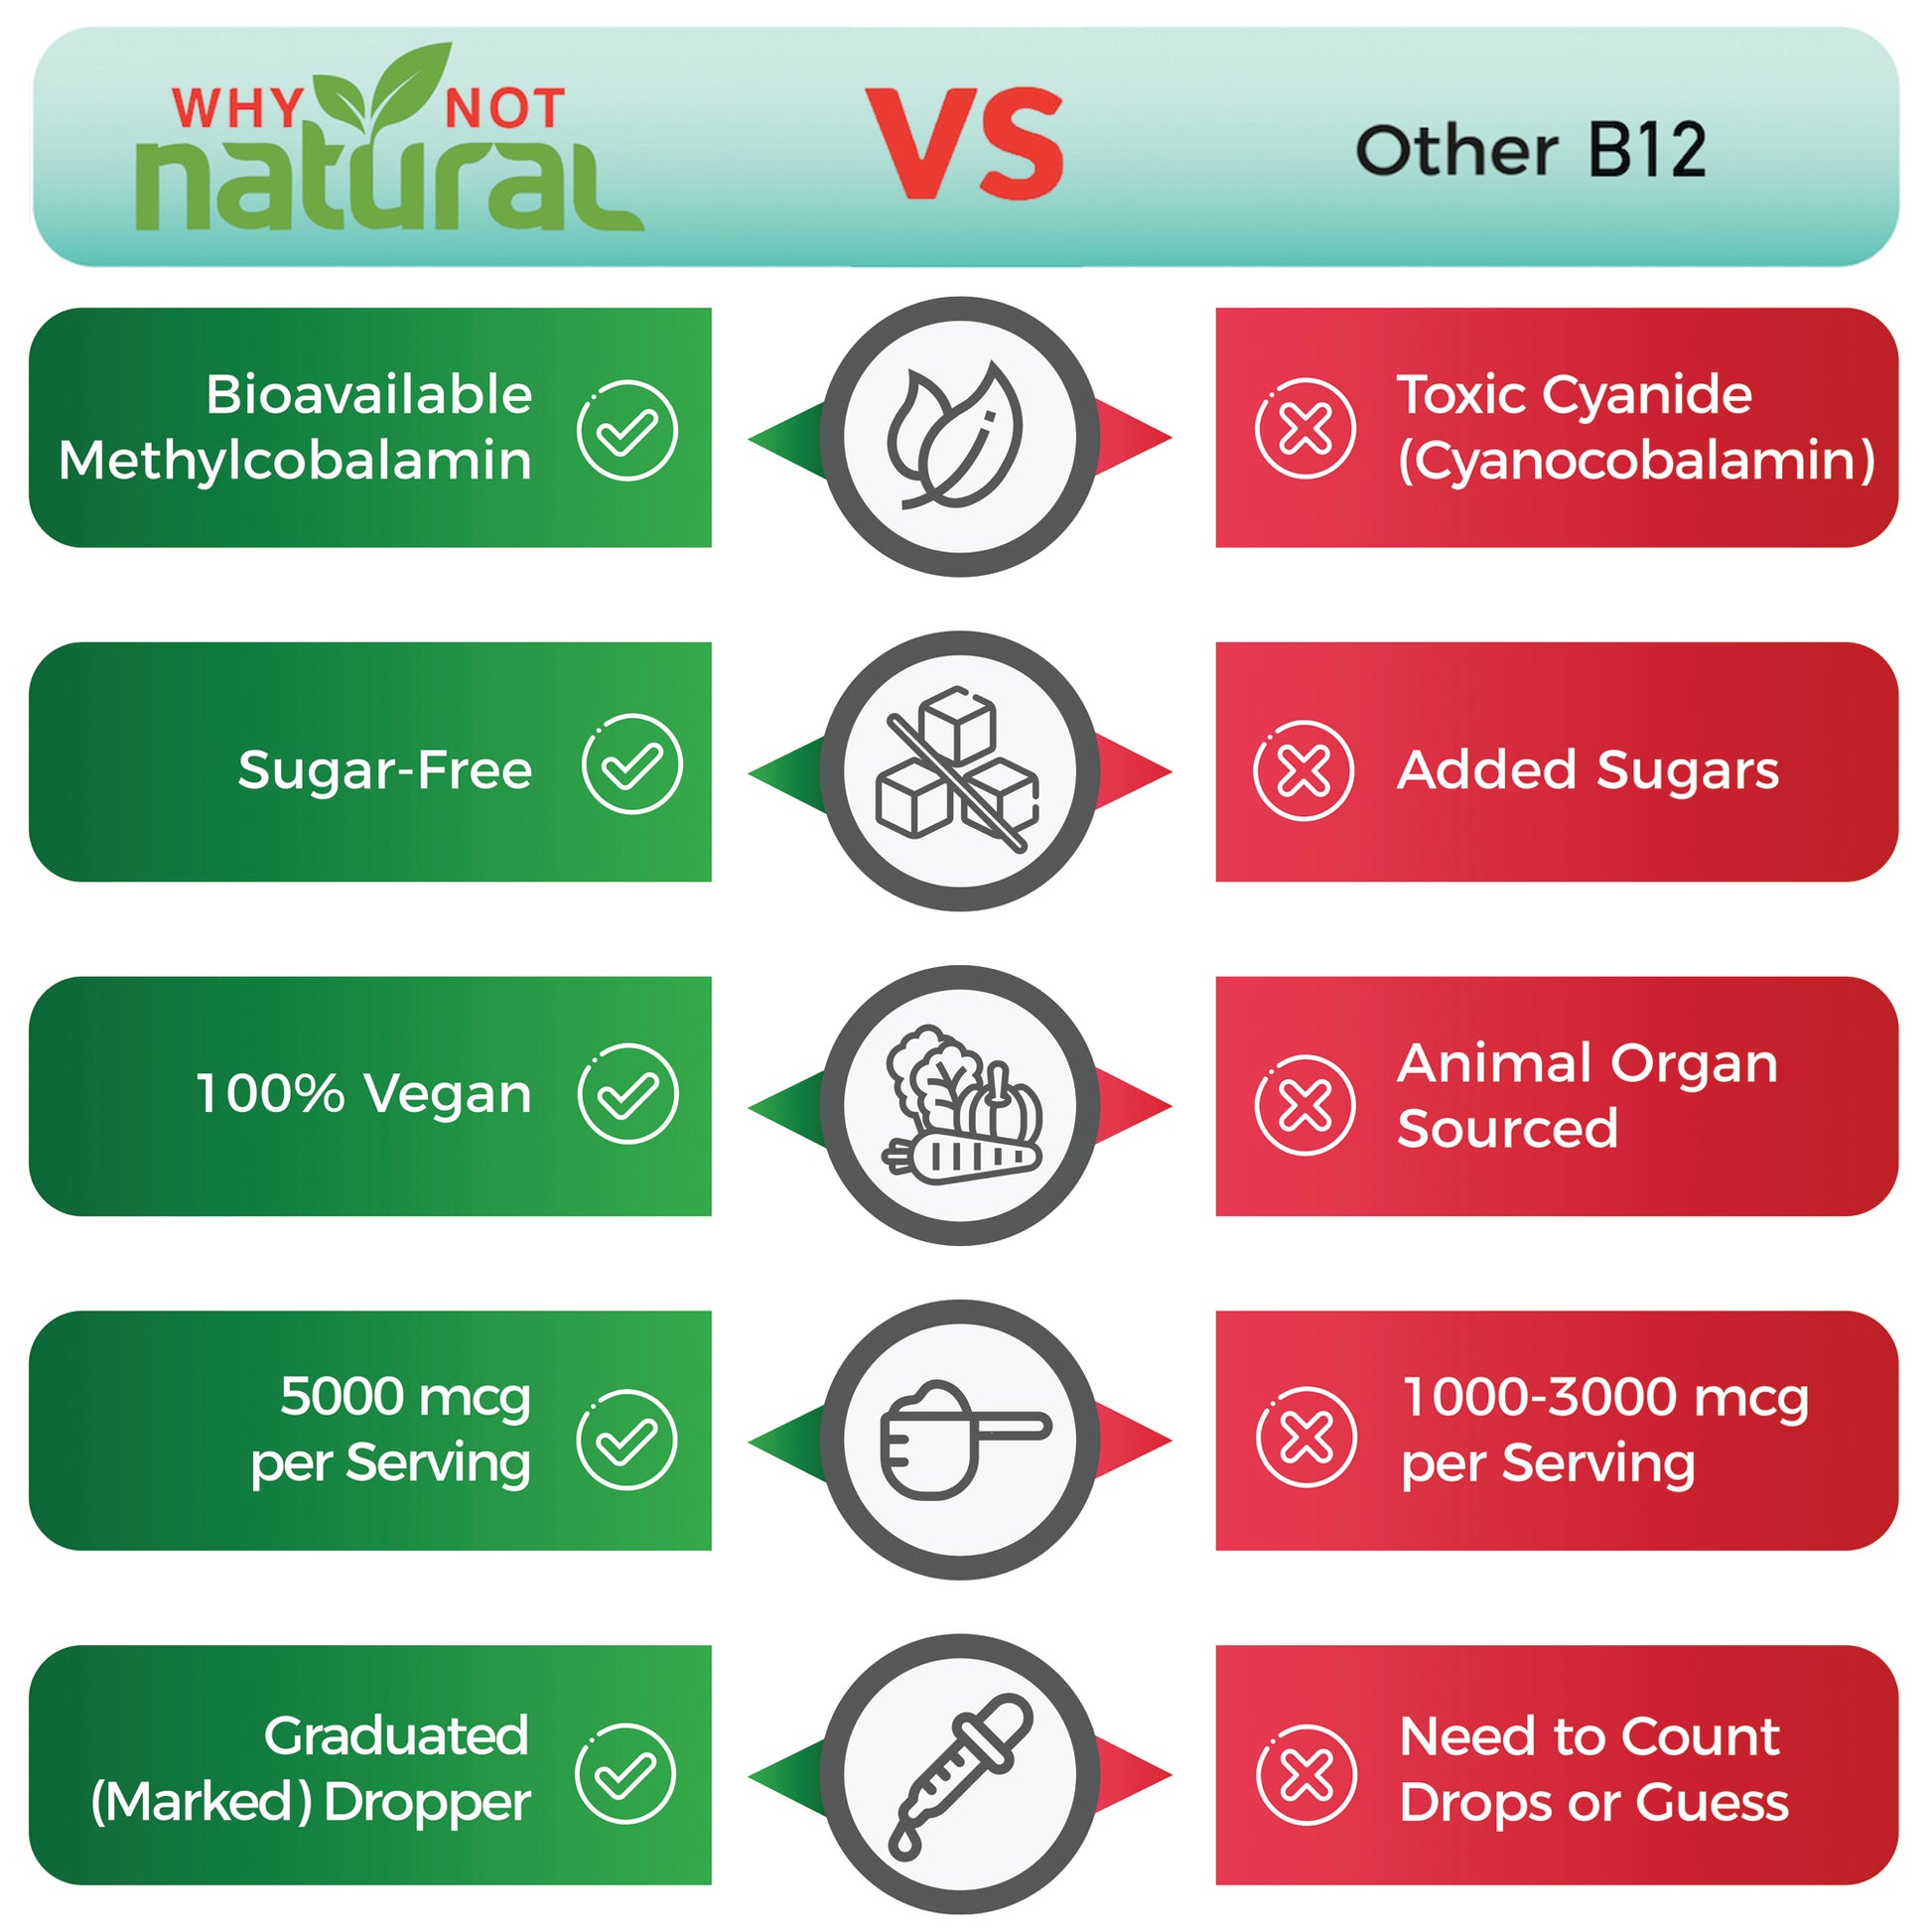 Why Not Natural vs Other B12